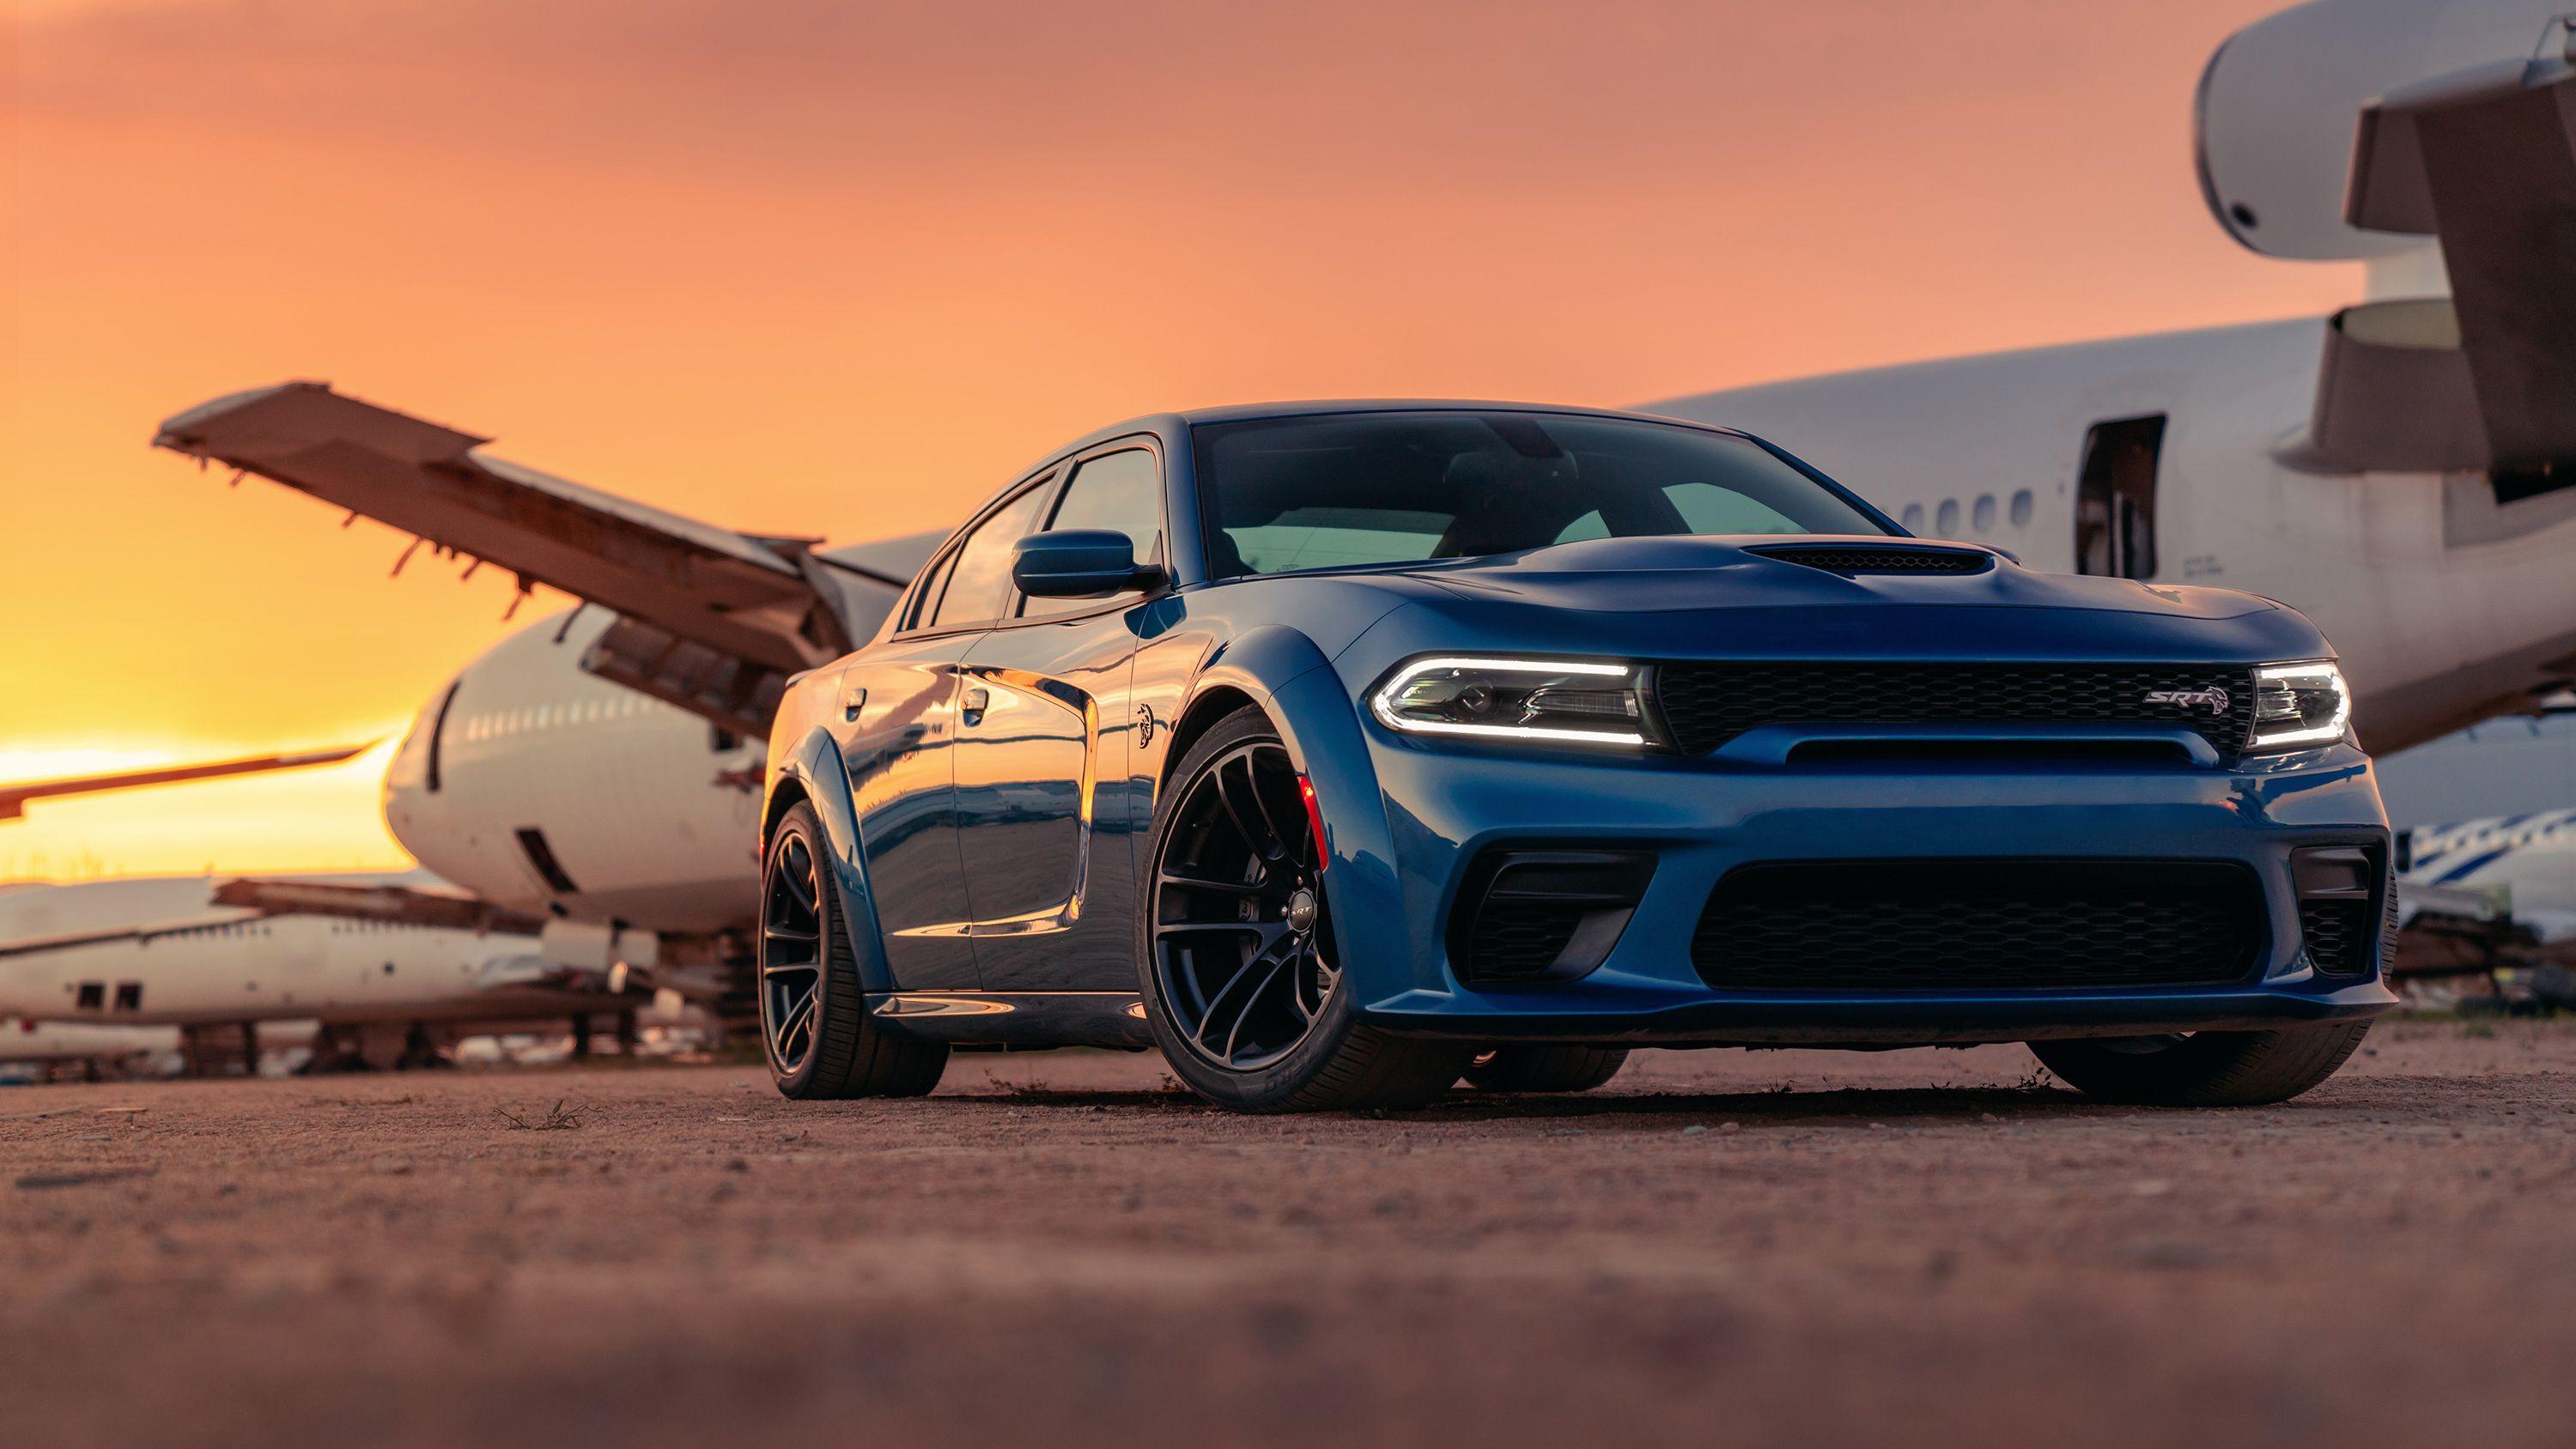 Dodge Charger Wallpapers - Top Free